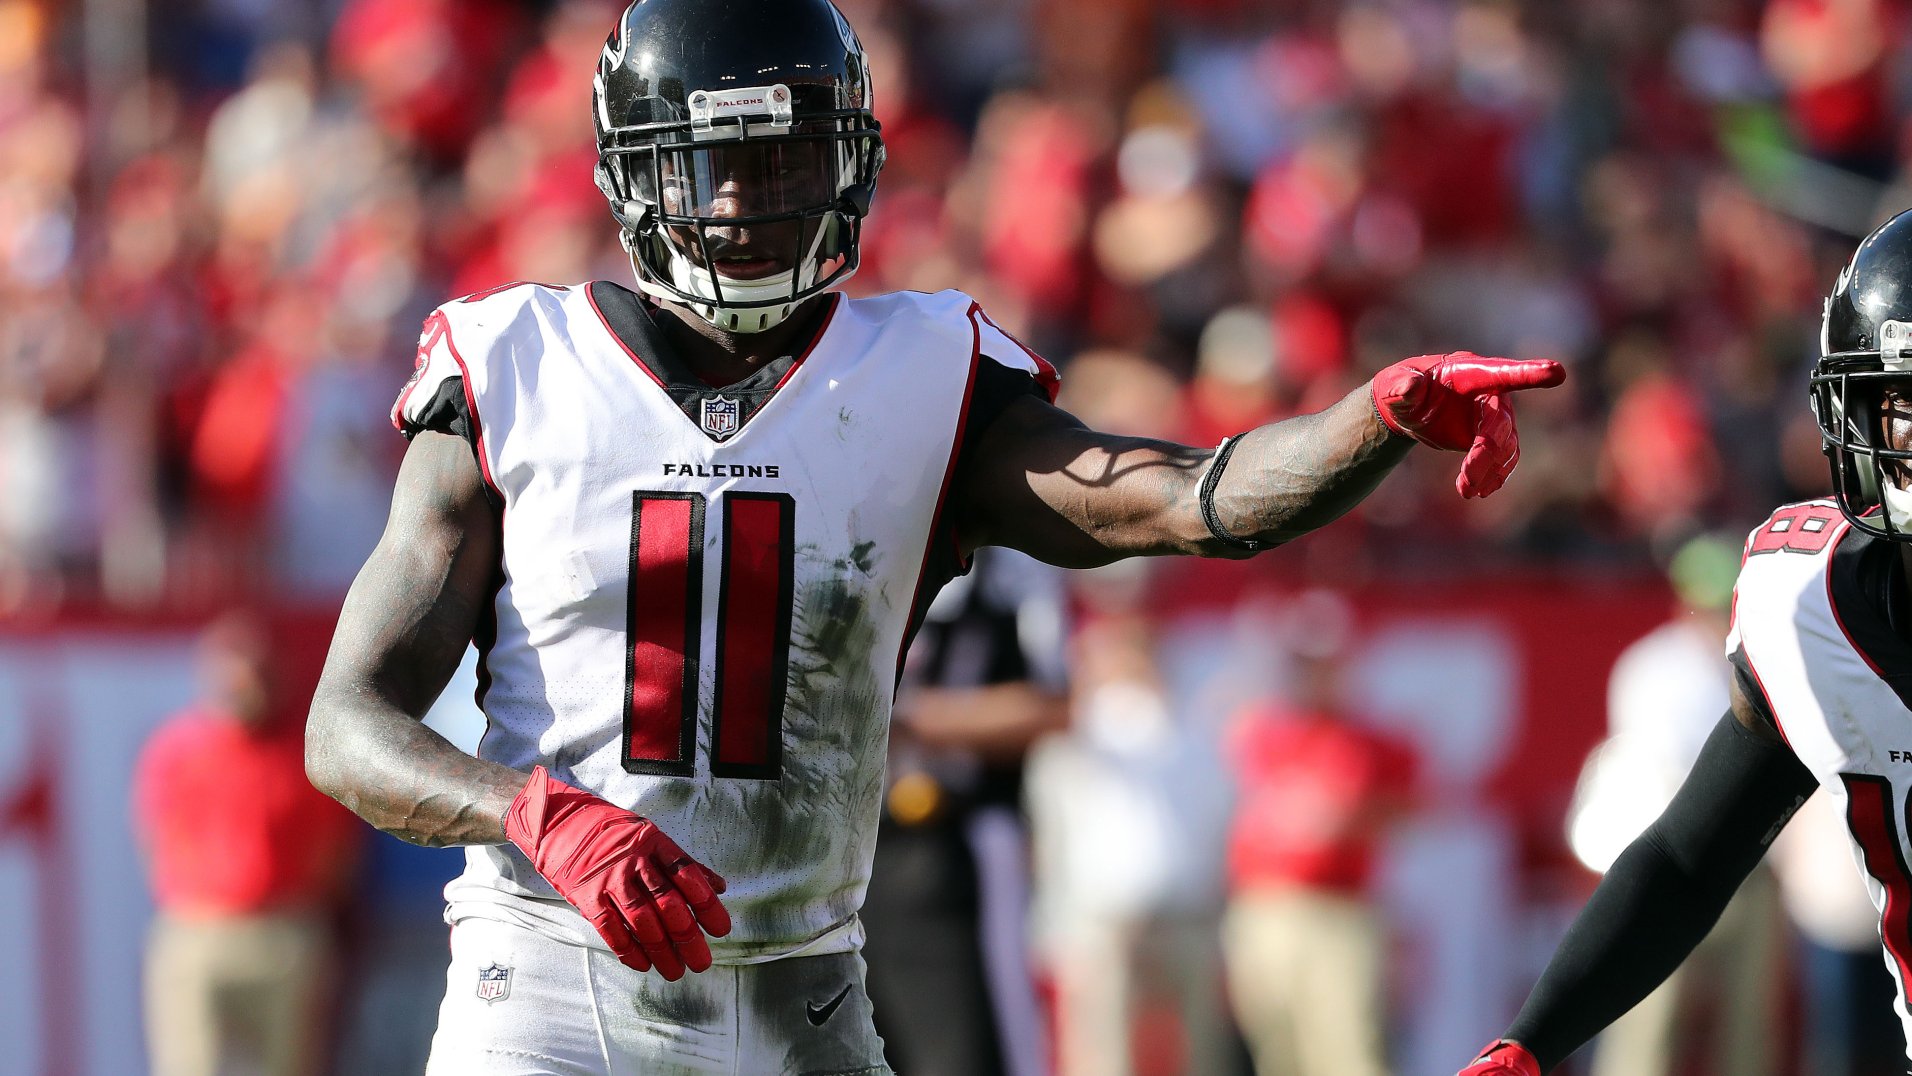 Yeartoyear repeatability among the top fantasy wide receivers